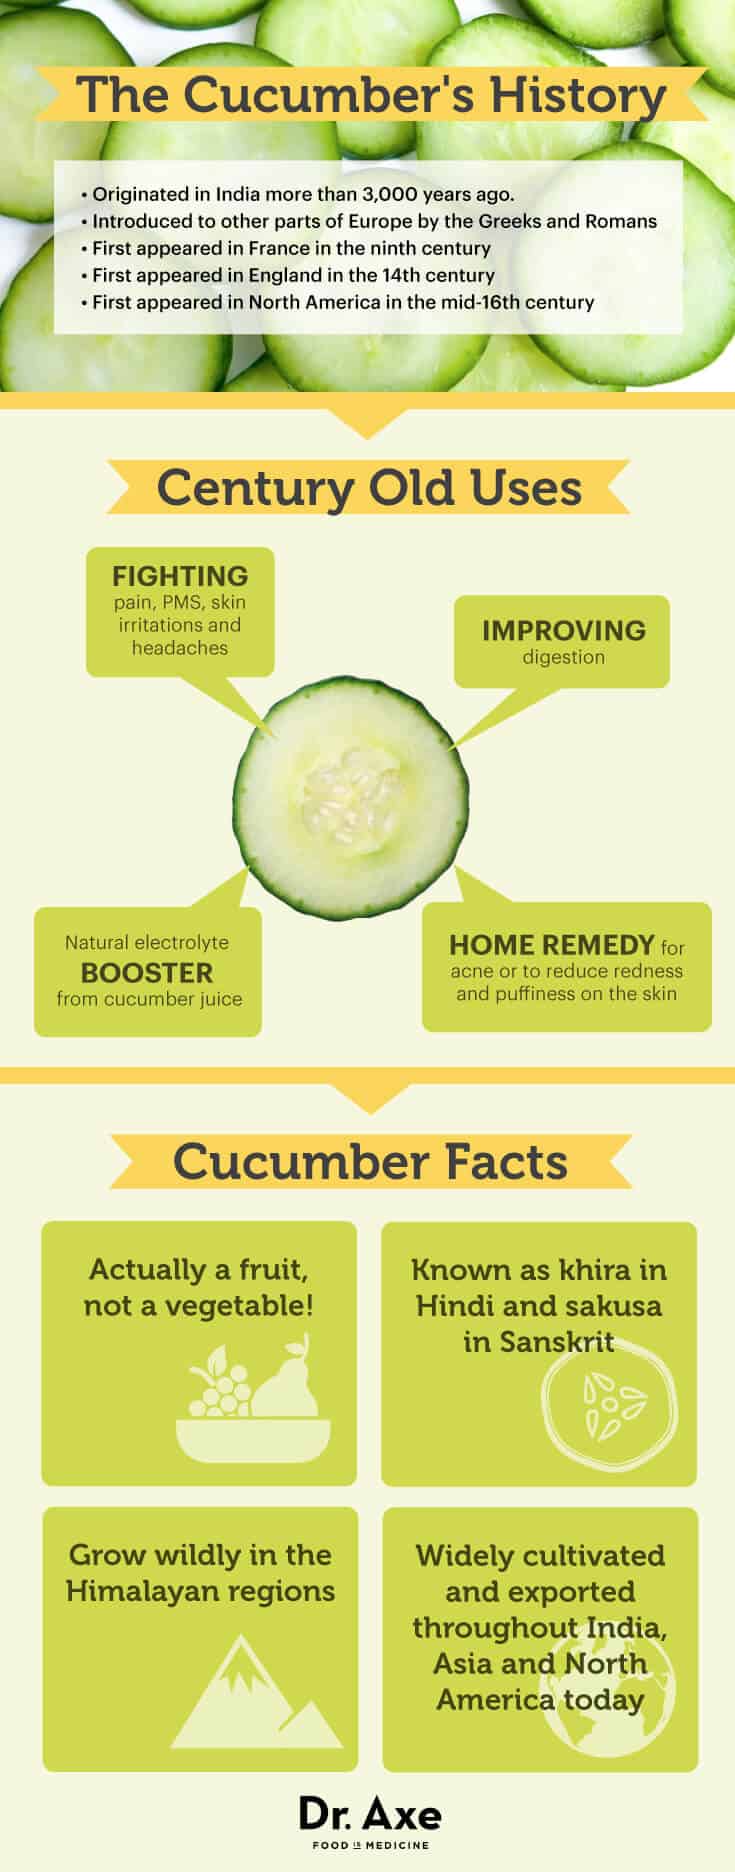 Cucumber history - Dr. Axe